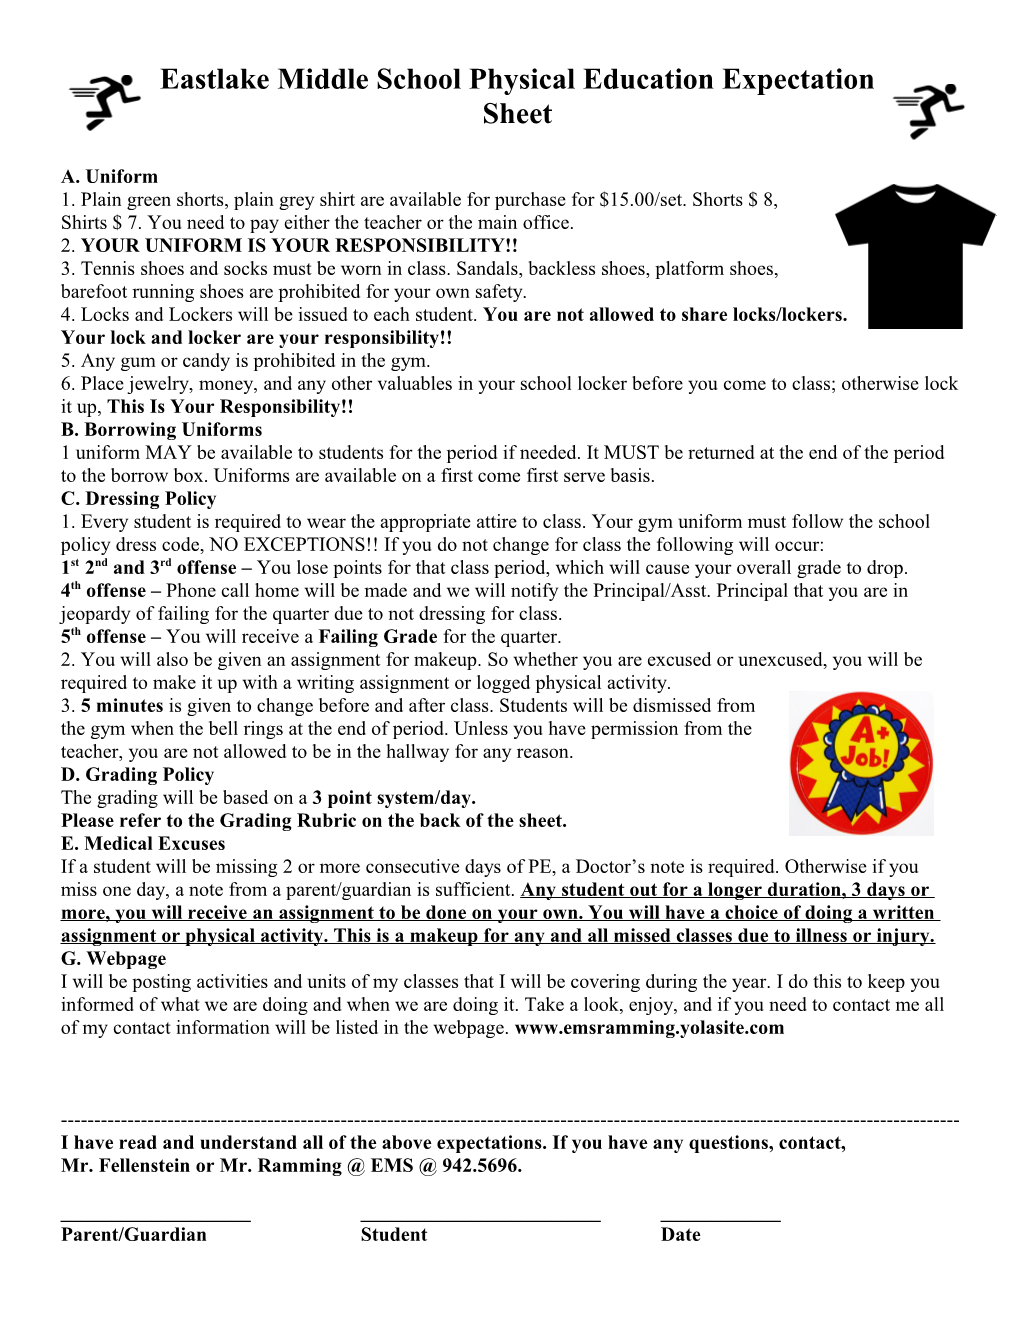 Eastlake Middle School Physical Education Expectation Sheet